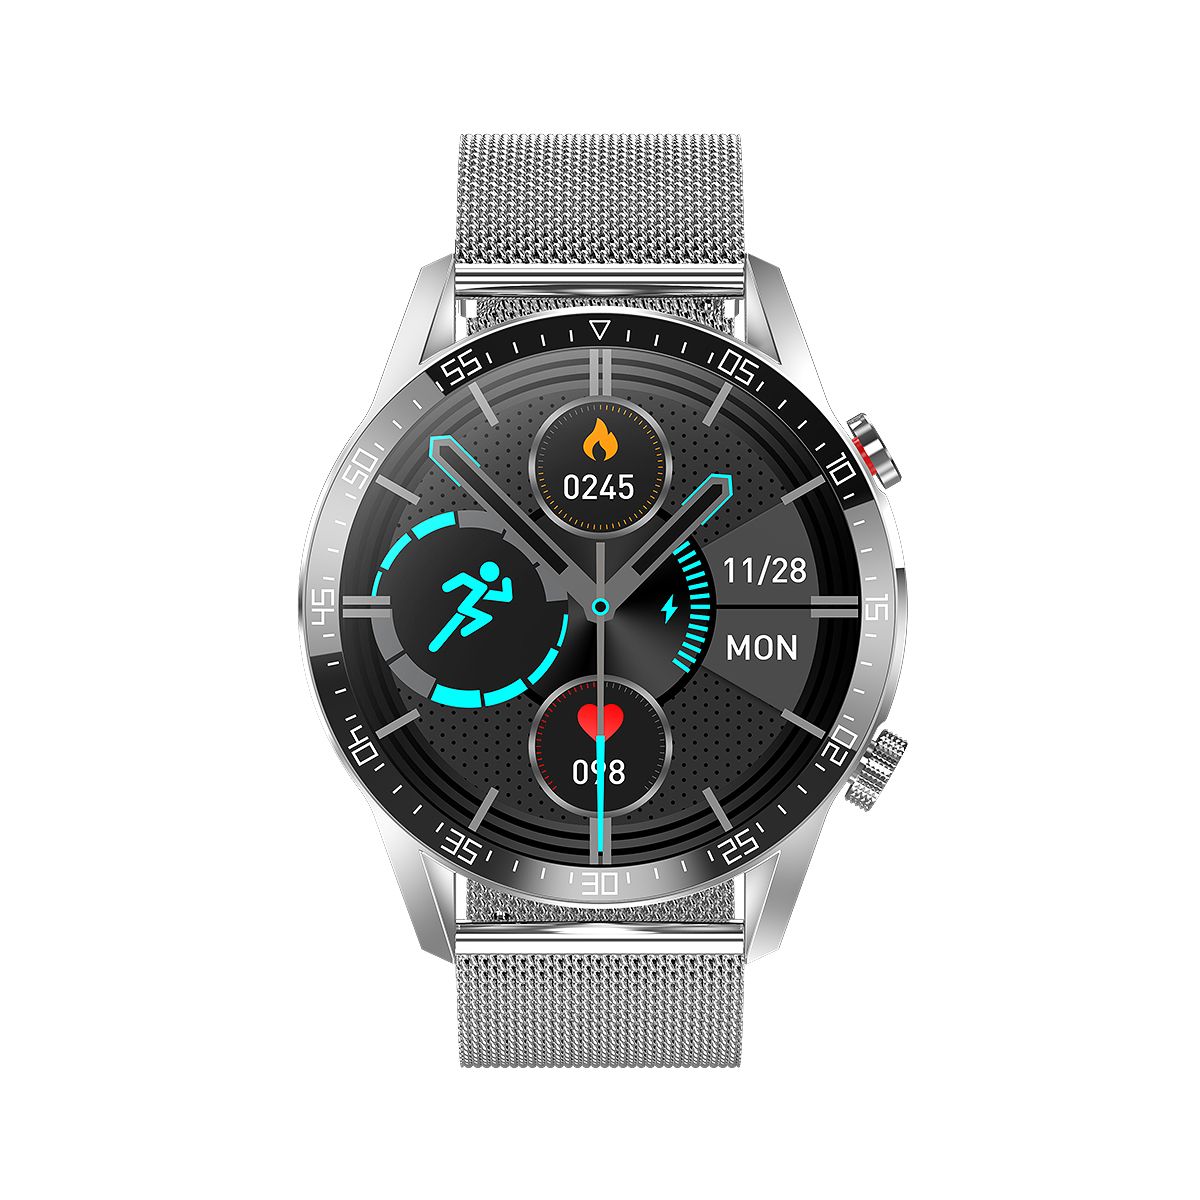 Smart Watch Men For Android Phones Fitness Tracker With Heart Rate Monitor For IOS IPhone GT3 Smartwatches